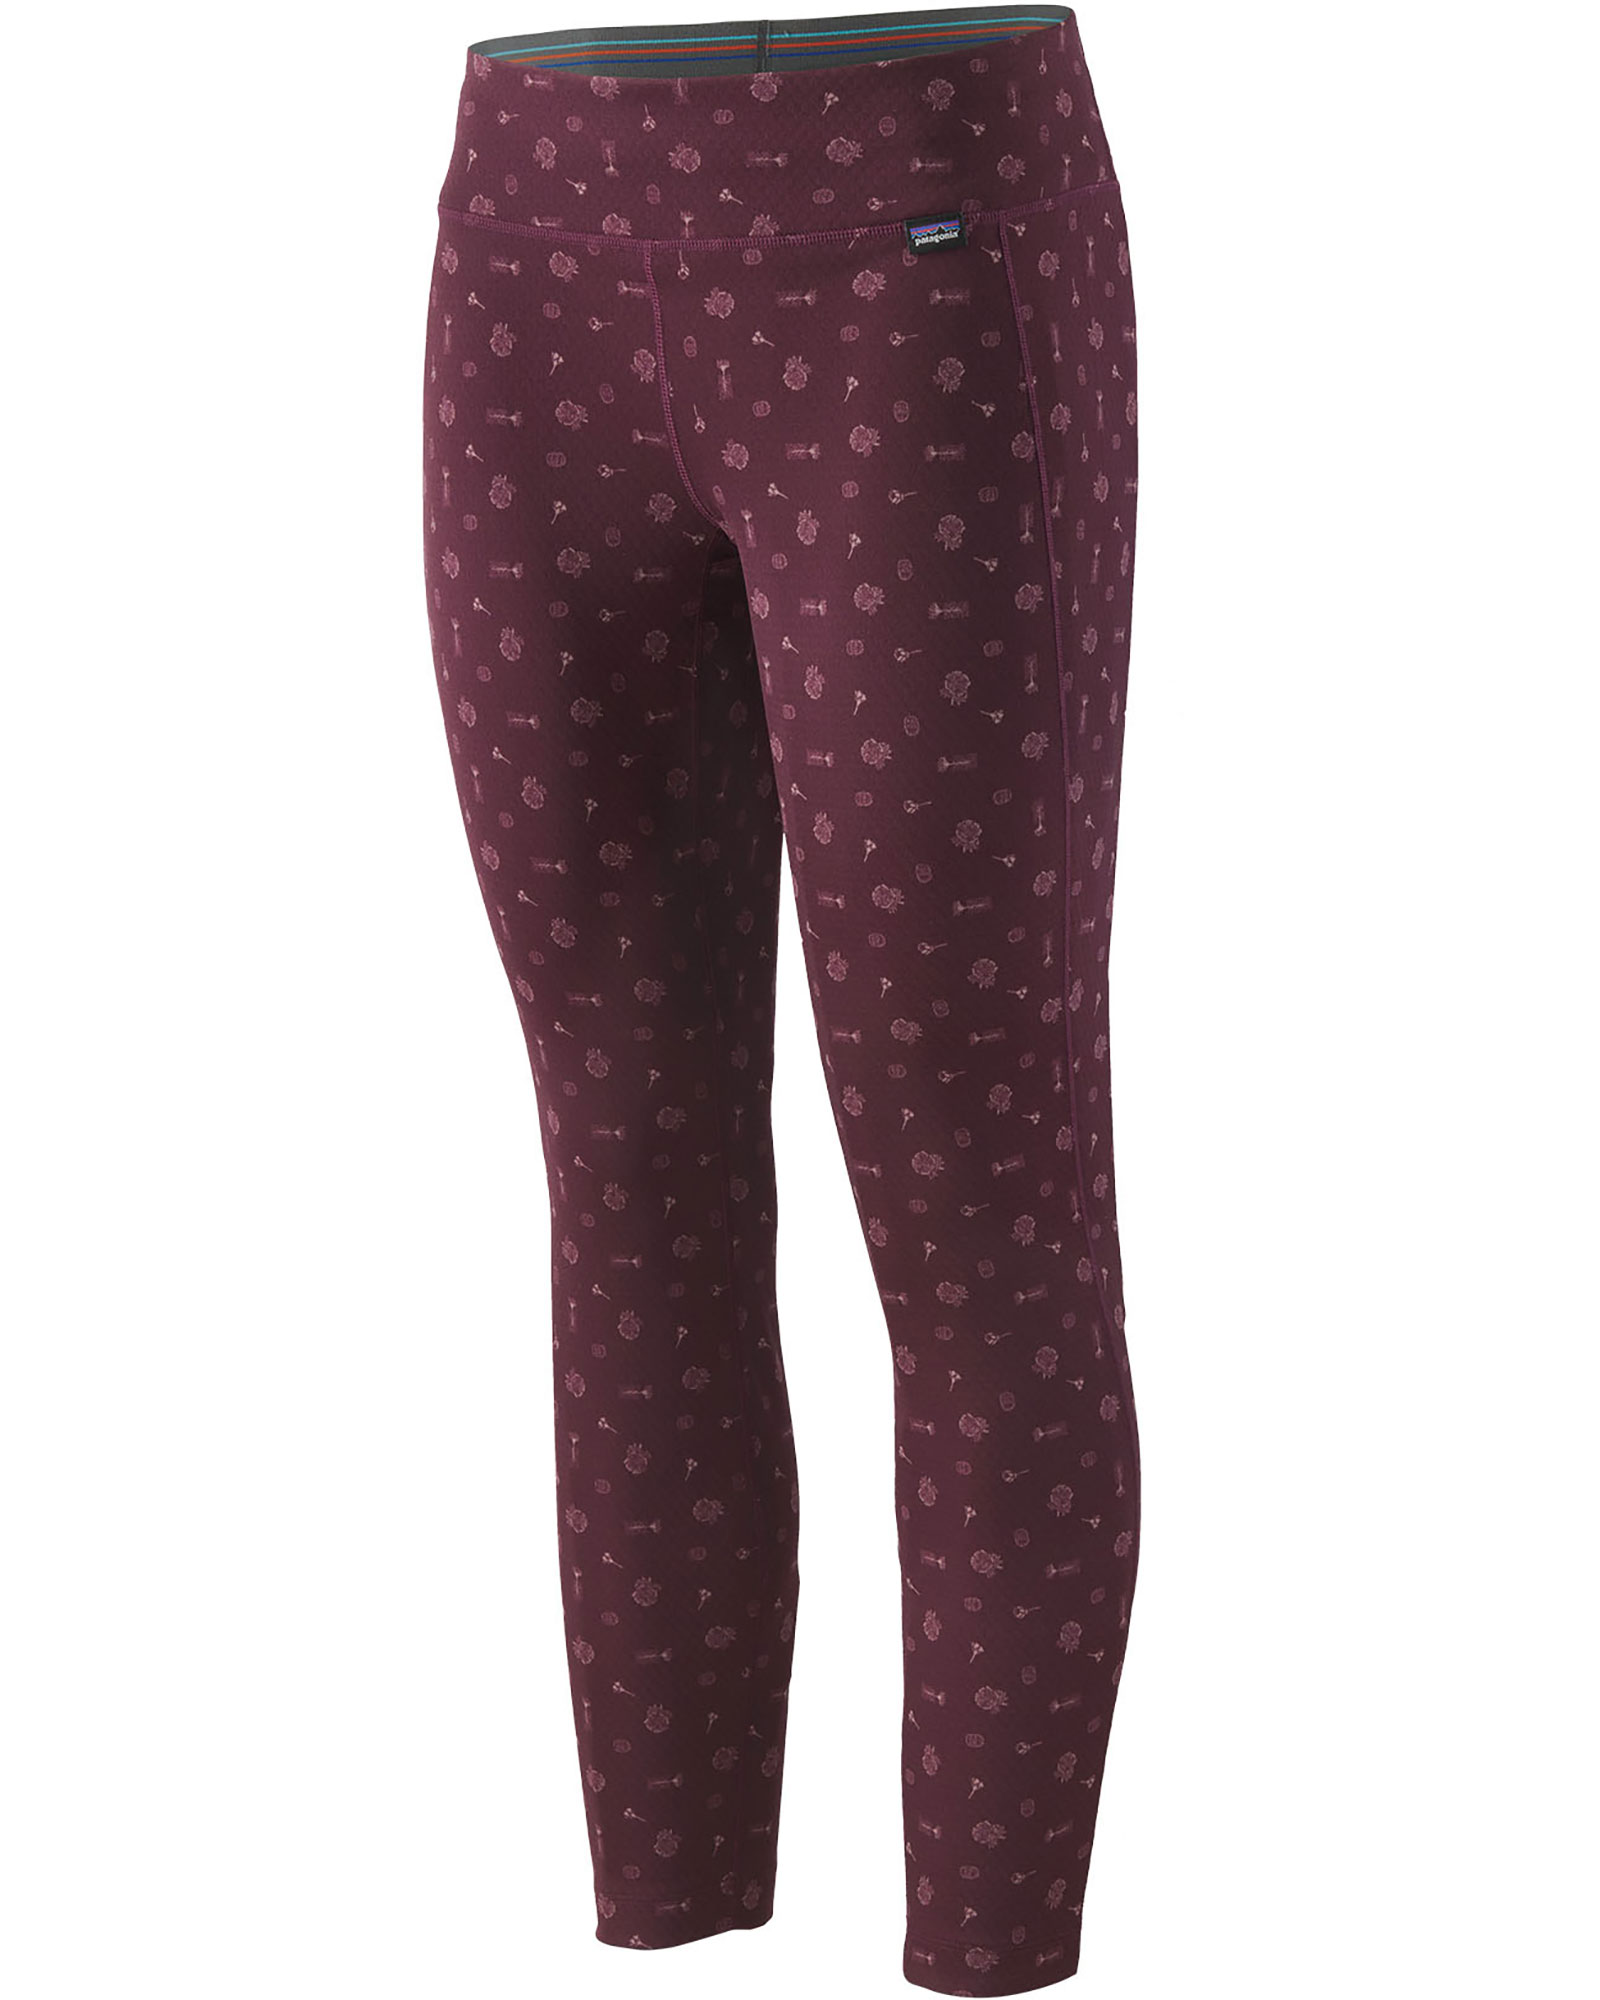 Patagonia Capilene Women’s Midweight Tights - Fire Floral: Night Plum XS